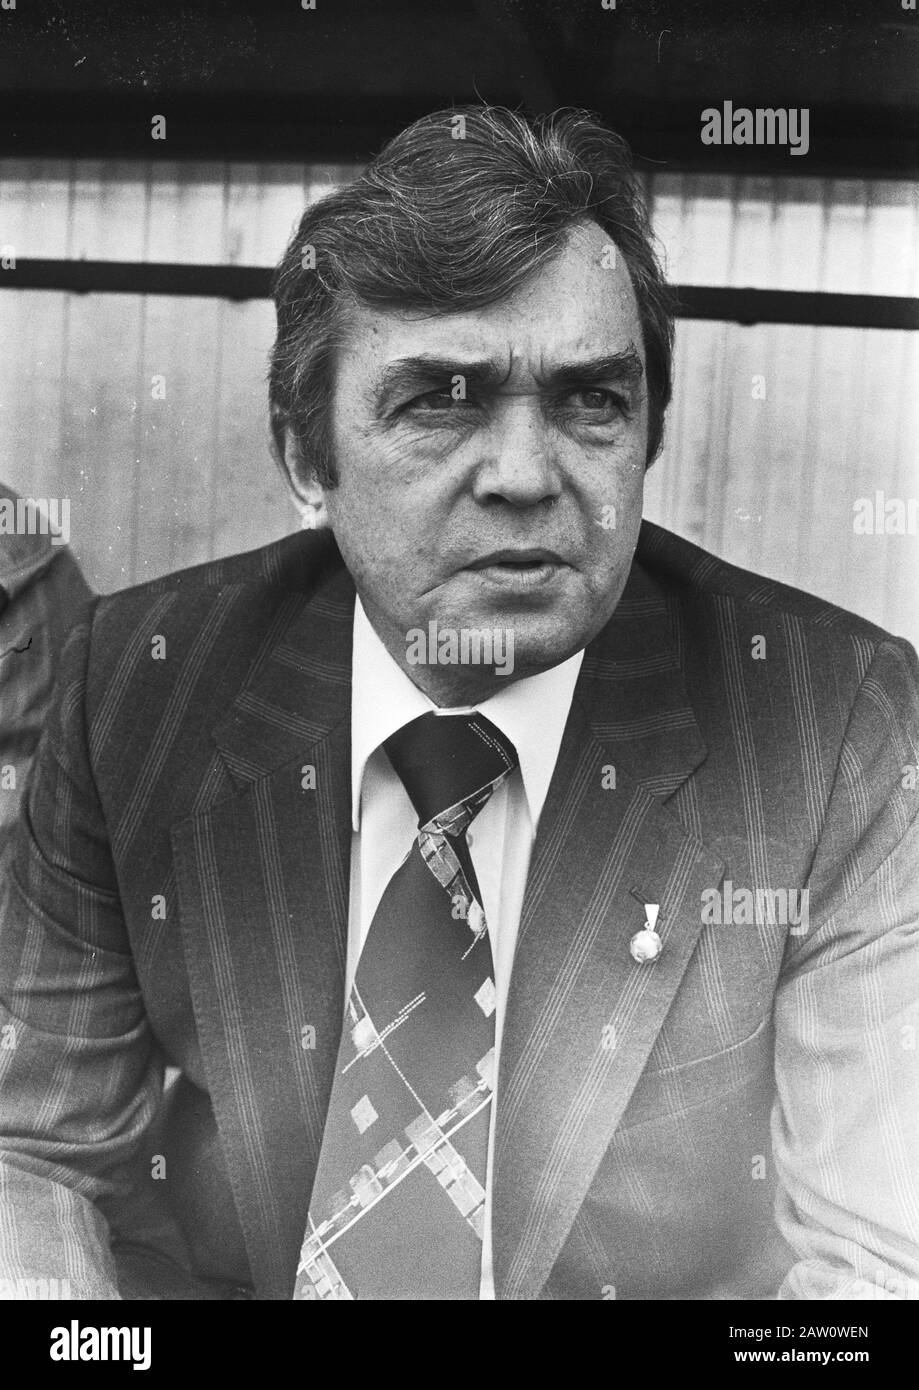 Practice match against FC Bruges Dutch team 1-3; substitutes in coaches in the dugout, No. 7a Ernst Happel (head). Date: May 13, 1978 Keywords: TRAINERS, sport, football Person Name: Ernst Happel, FC Bruges Stock Photo